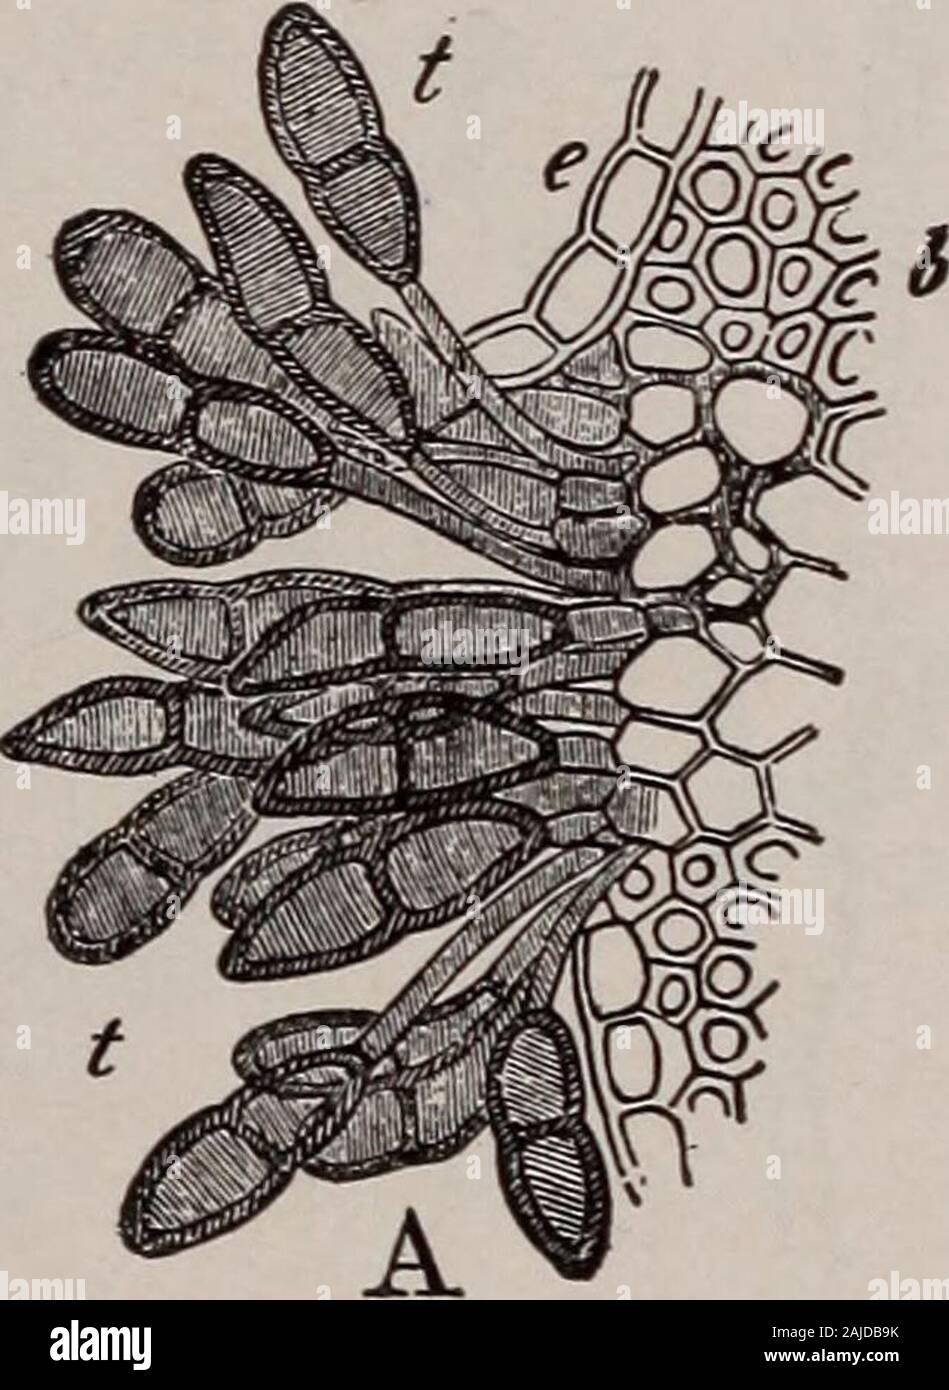 Elementary botany . Fig. 219.A,.section through sorus of black rust of wheat, showing teleutospores. B, nvyceliumbearing both teleutospores and uredospores. (After de Bary.) one season, so this is the form in which the fungus is greatly multiplied andwidely distributed. 192 MORPHOLOGY. 407a. Teleutcspores the last stage of the fungus in the season.—The teleu- tospores are developed late in the season, or late in the development of the host plant (in this case thewheat is the host). Theythen rest during the winter.In the spring under favor-able conditions each cell ofthe teleutospore germi-nate Stock Photo